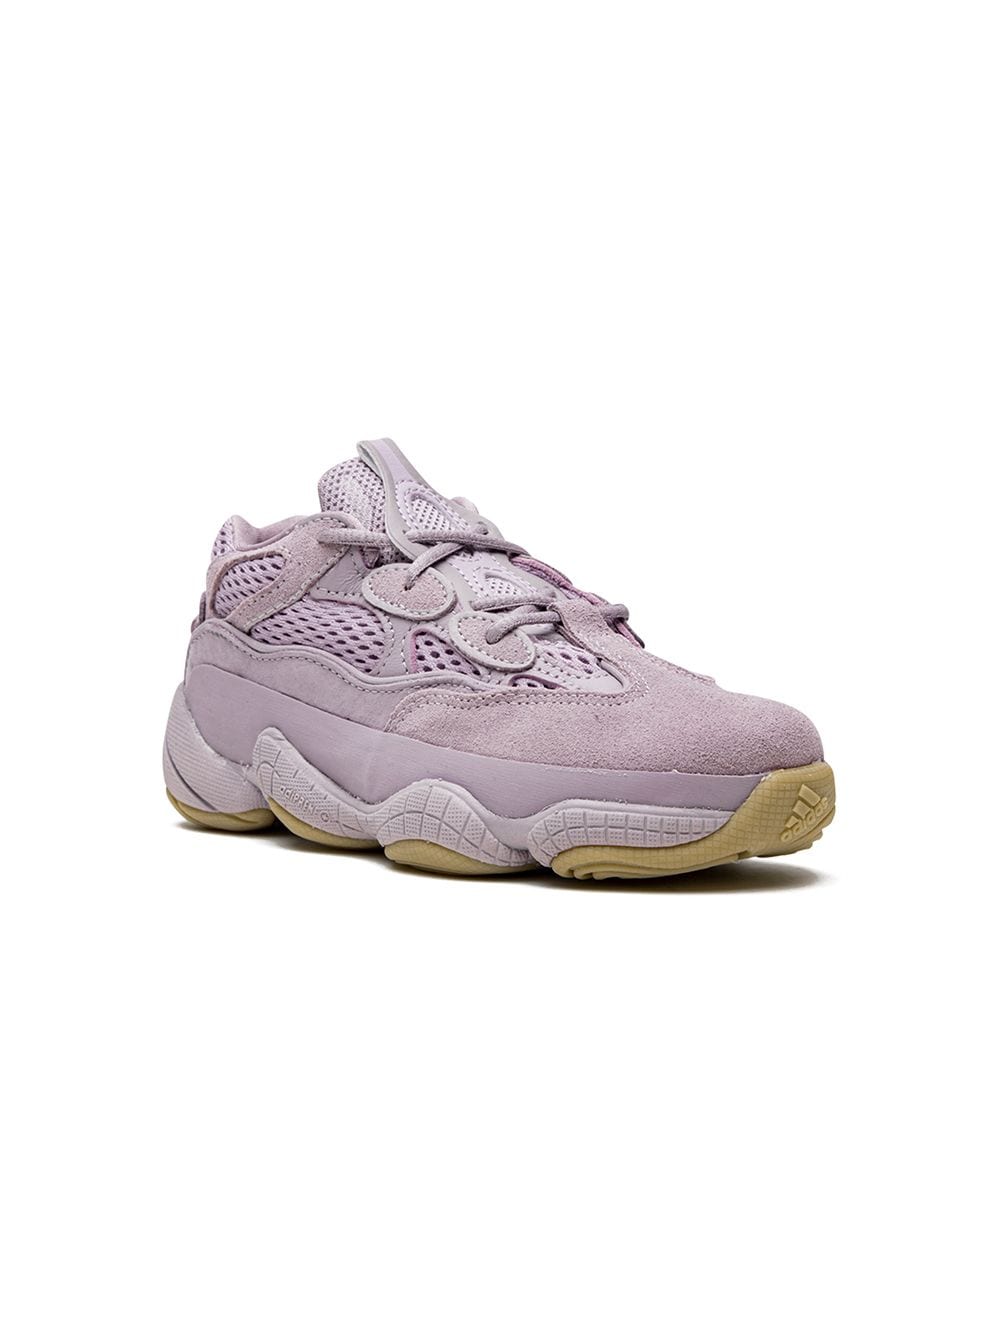 Adidas Yeezy Kids 500 "Soft Vision" sneakers Pink